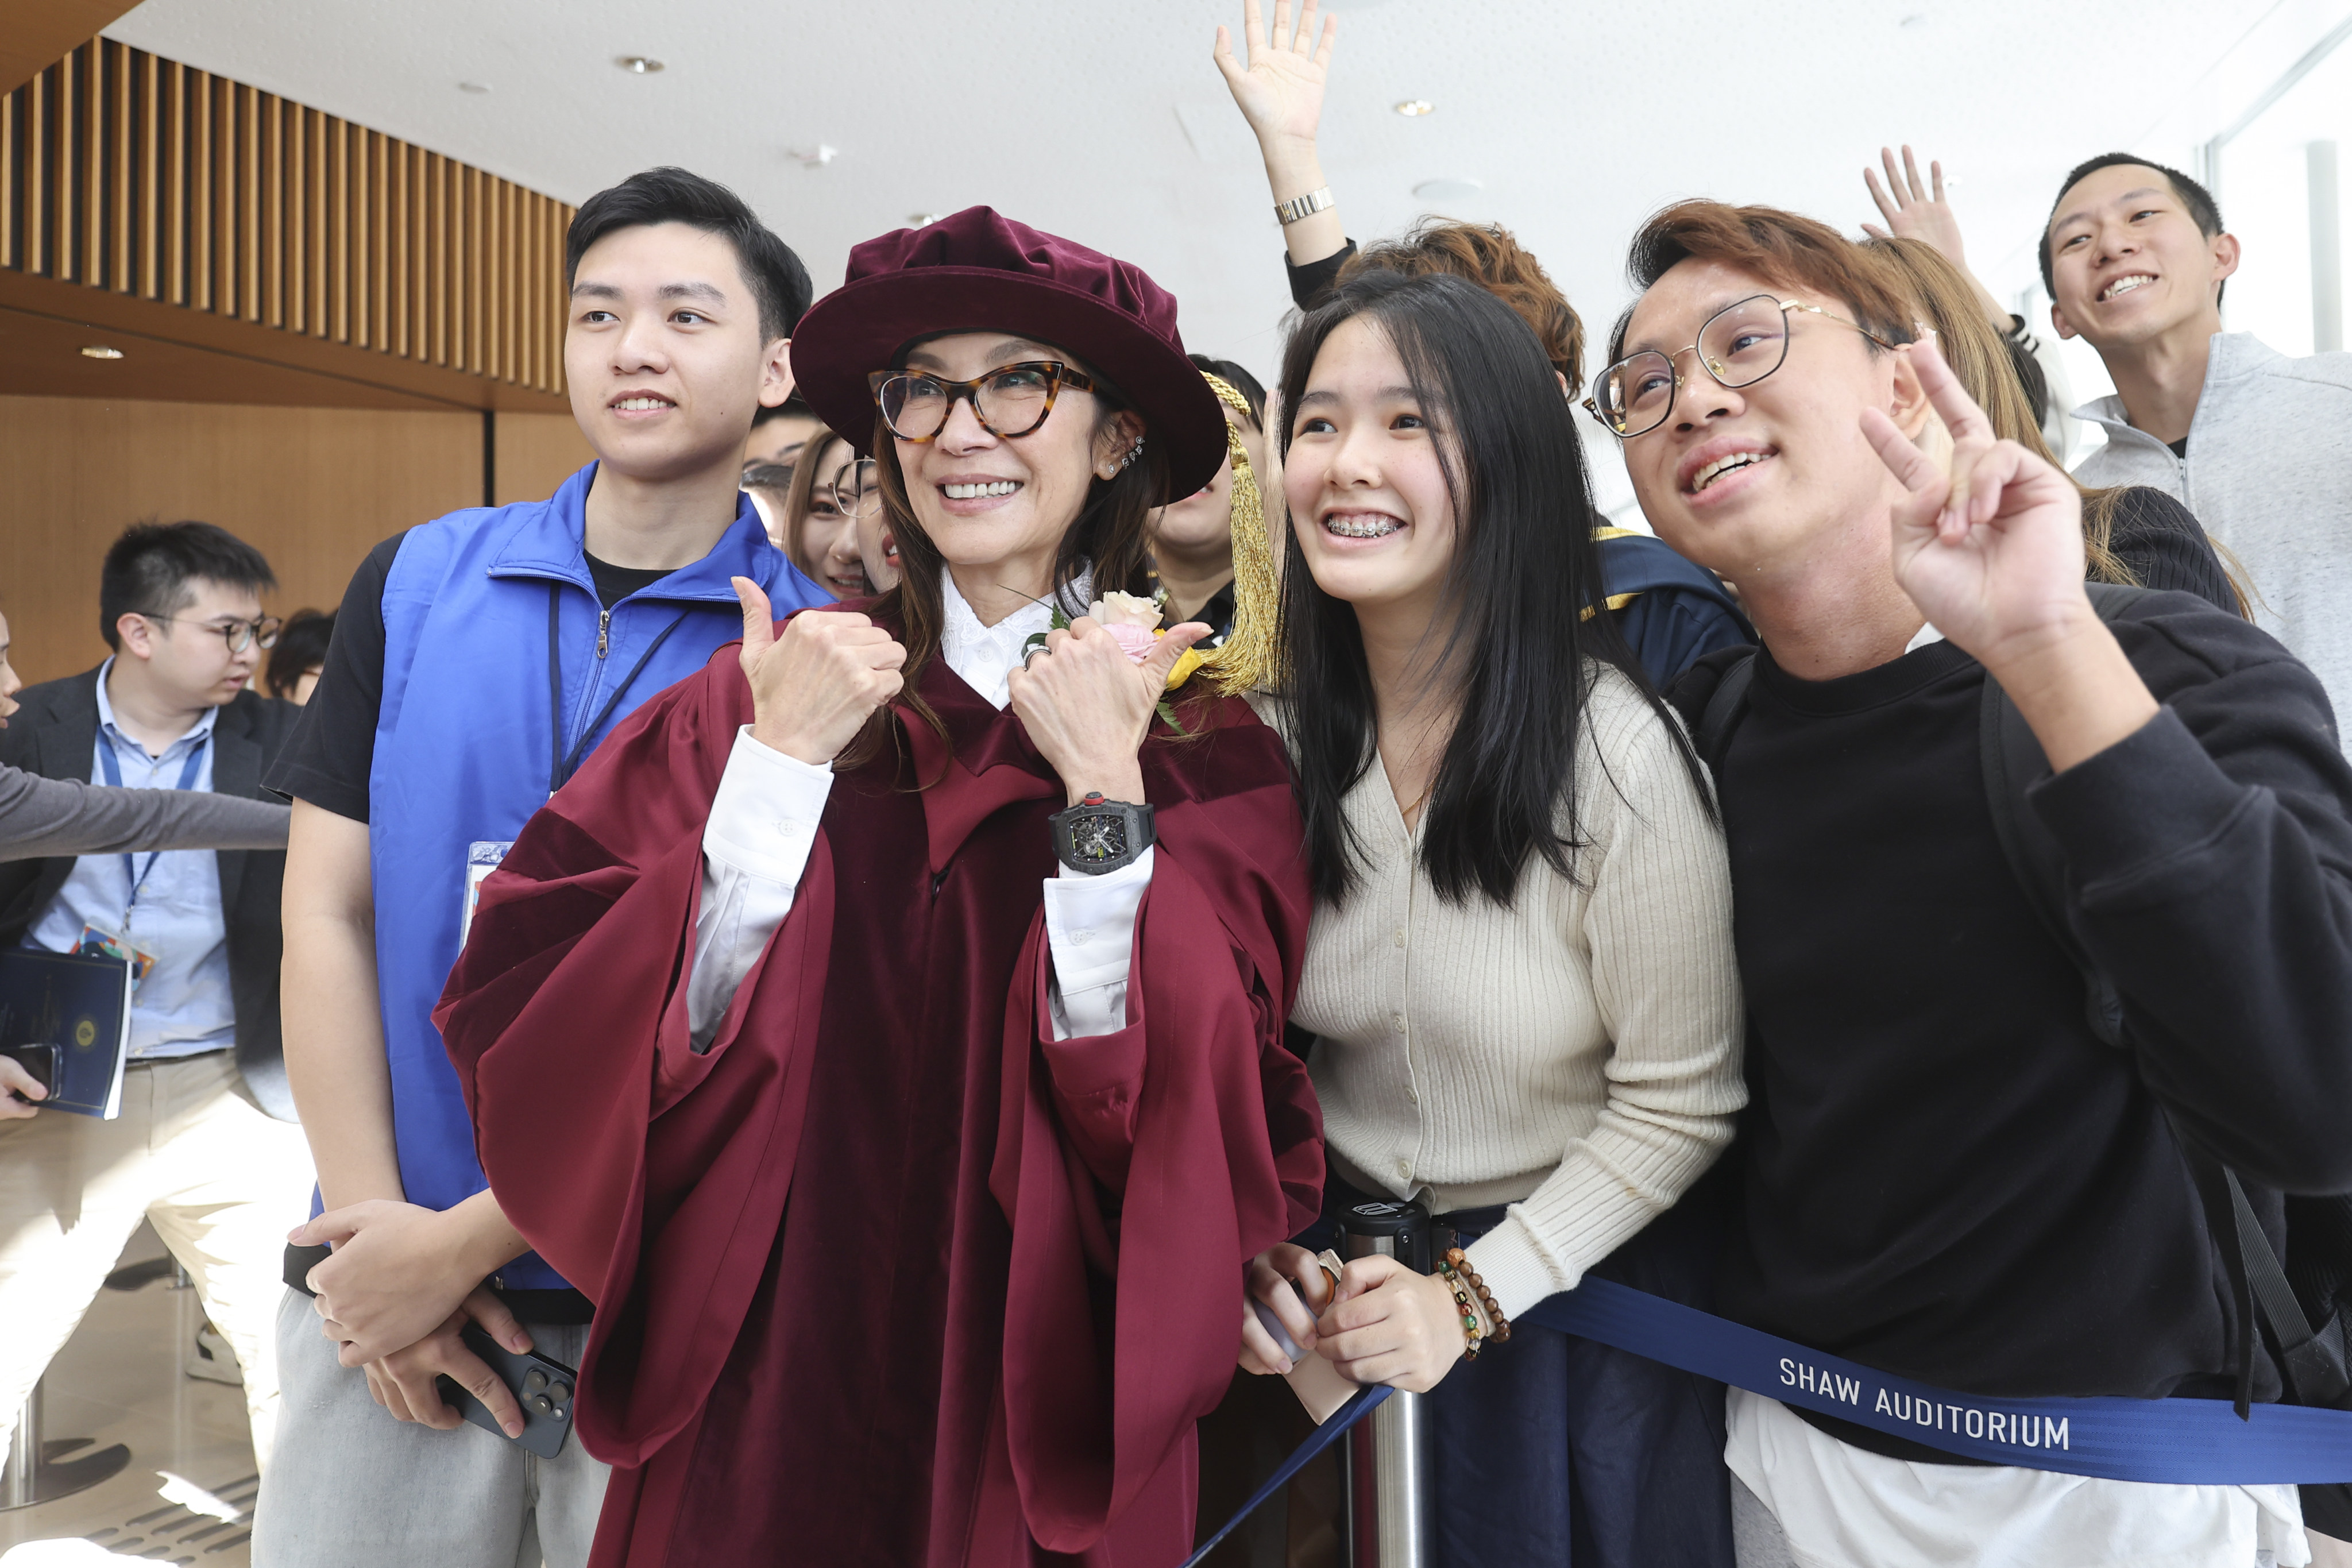 Thumbs up from Michelle Yeoh as she poses for a picture with fans at the Hong Kong University of Science and Technology. Photo: Edmond So